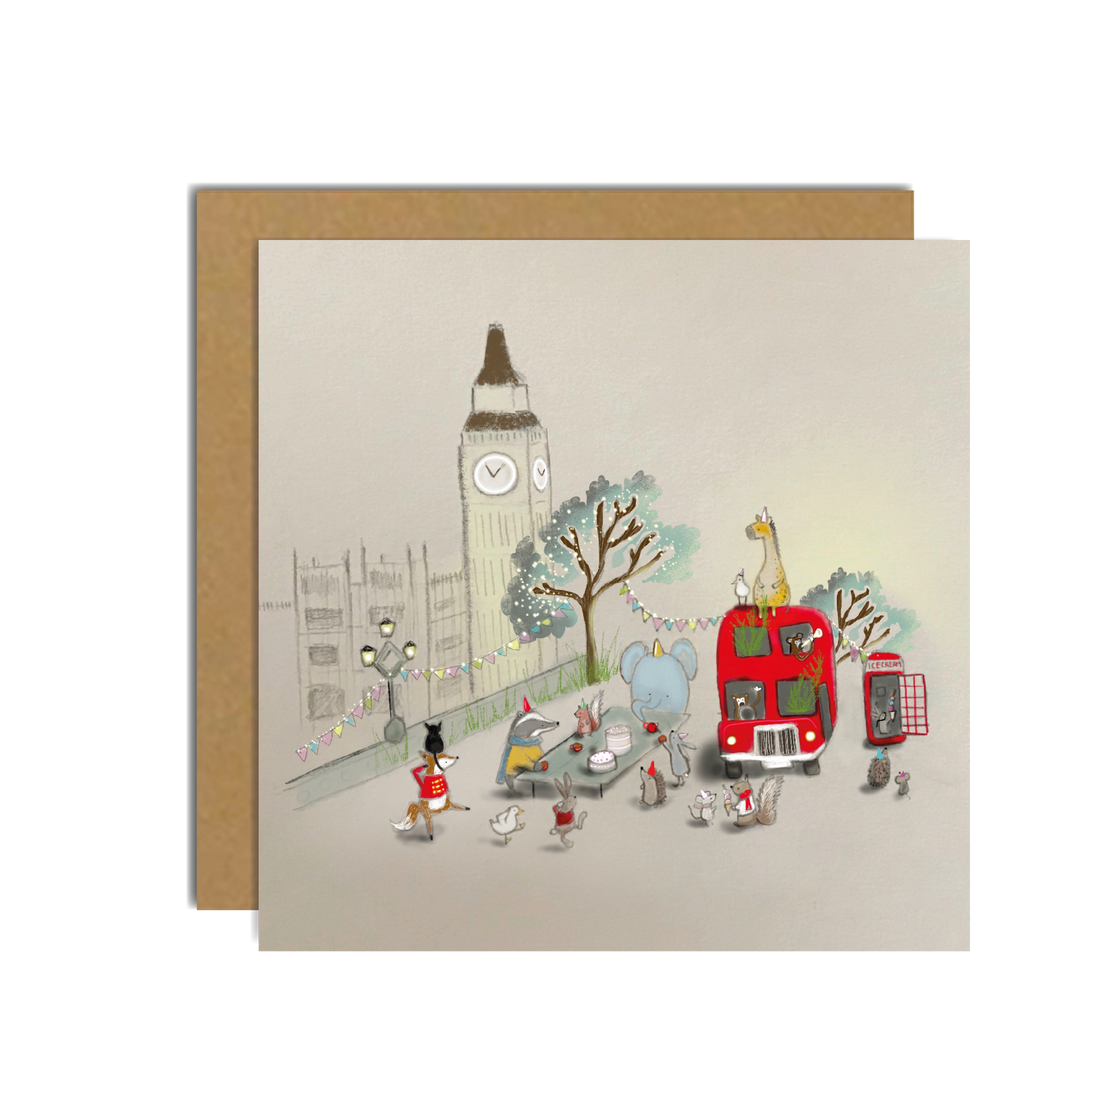 Toots Design Wild London Birthday Party Card